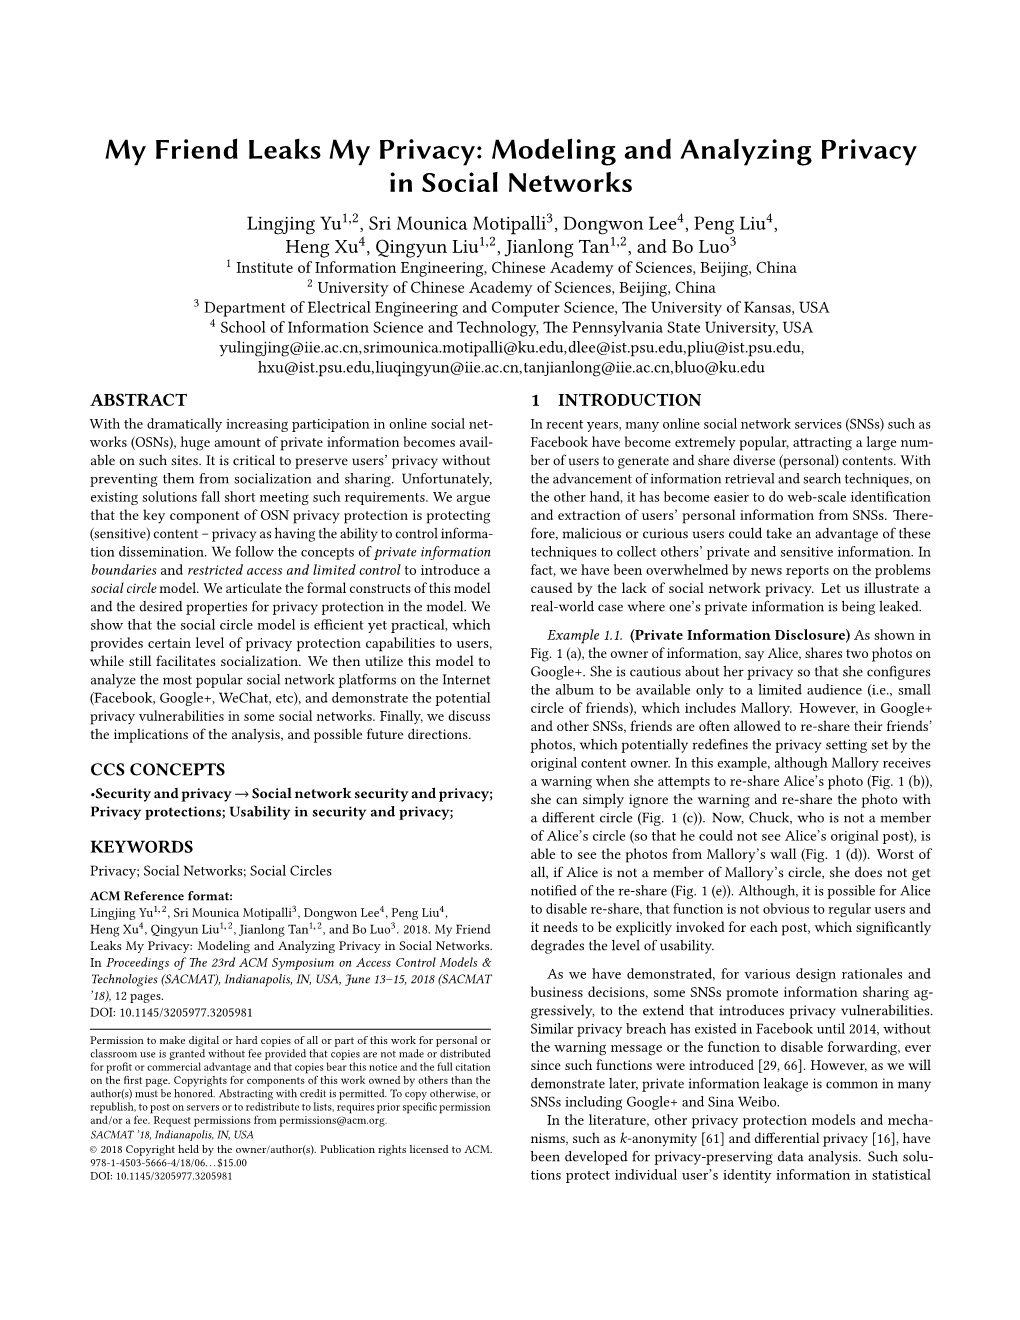 My Friend Leaks My Privacy: Modeling and Analyzing Privacy in Social Networks